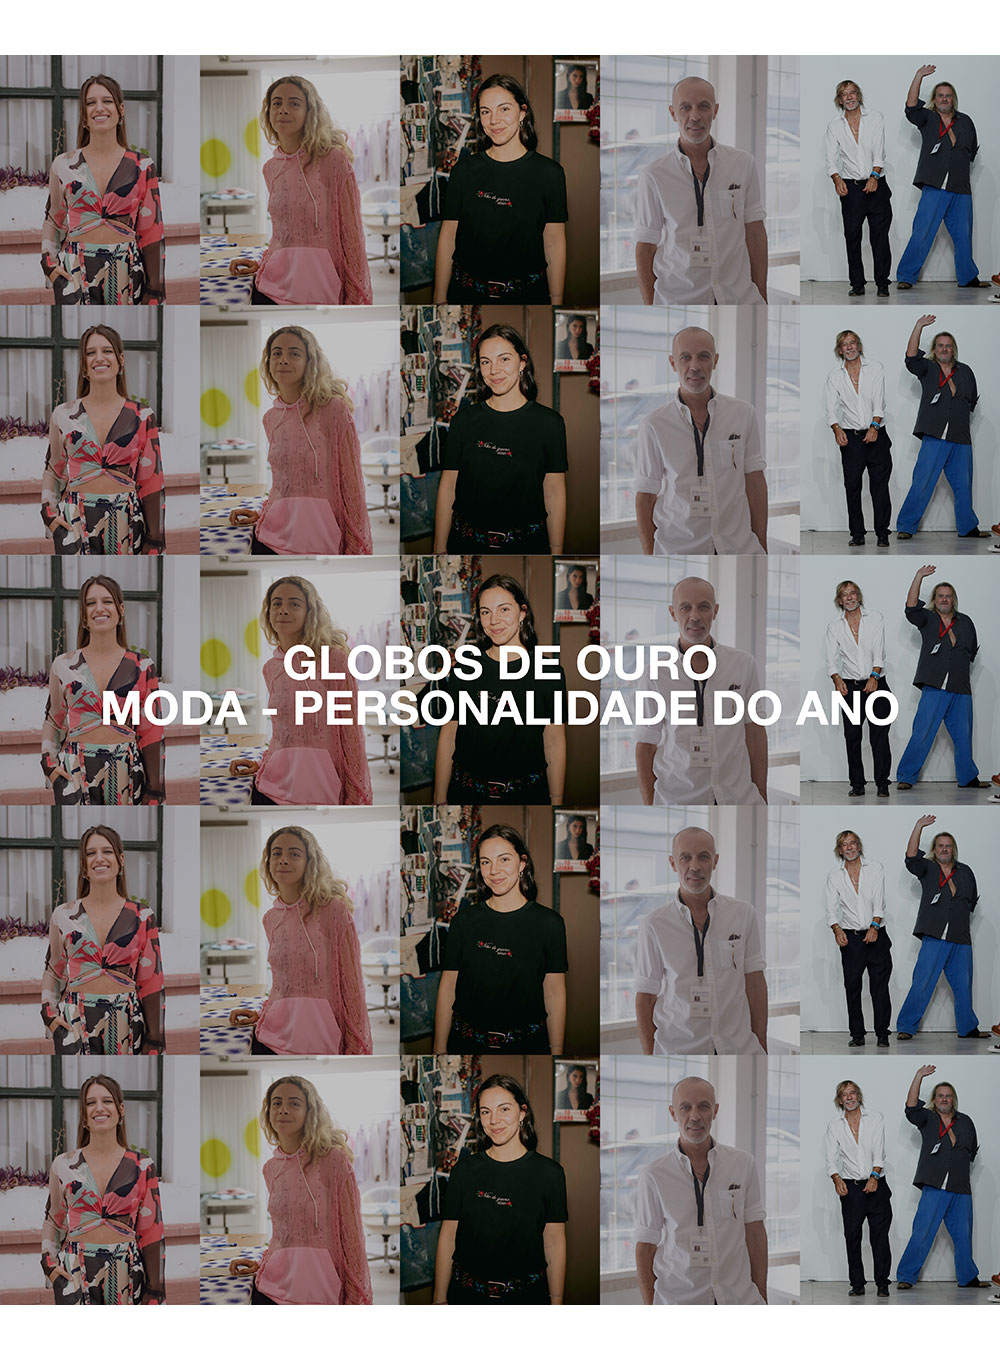 GLOBOS DE OURO: NOMINEES IN THE FASHION CATEGORY